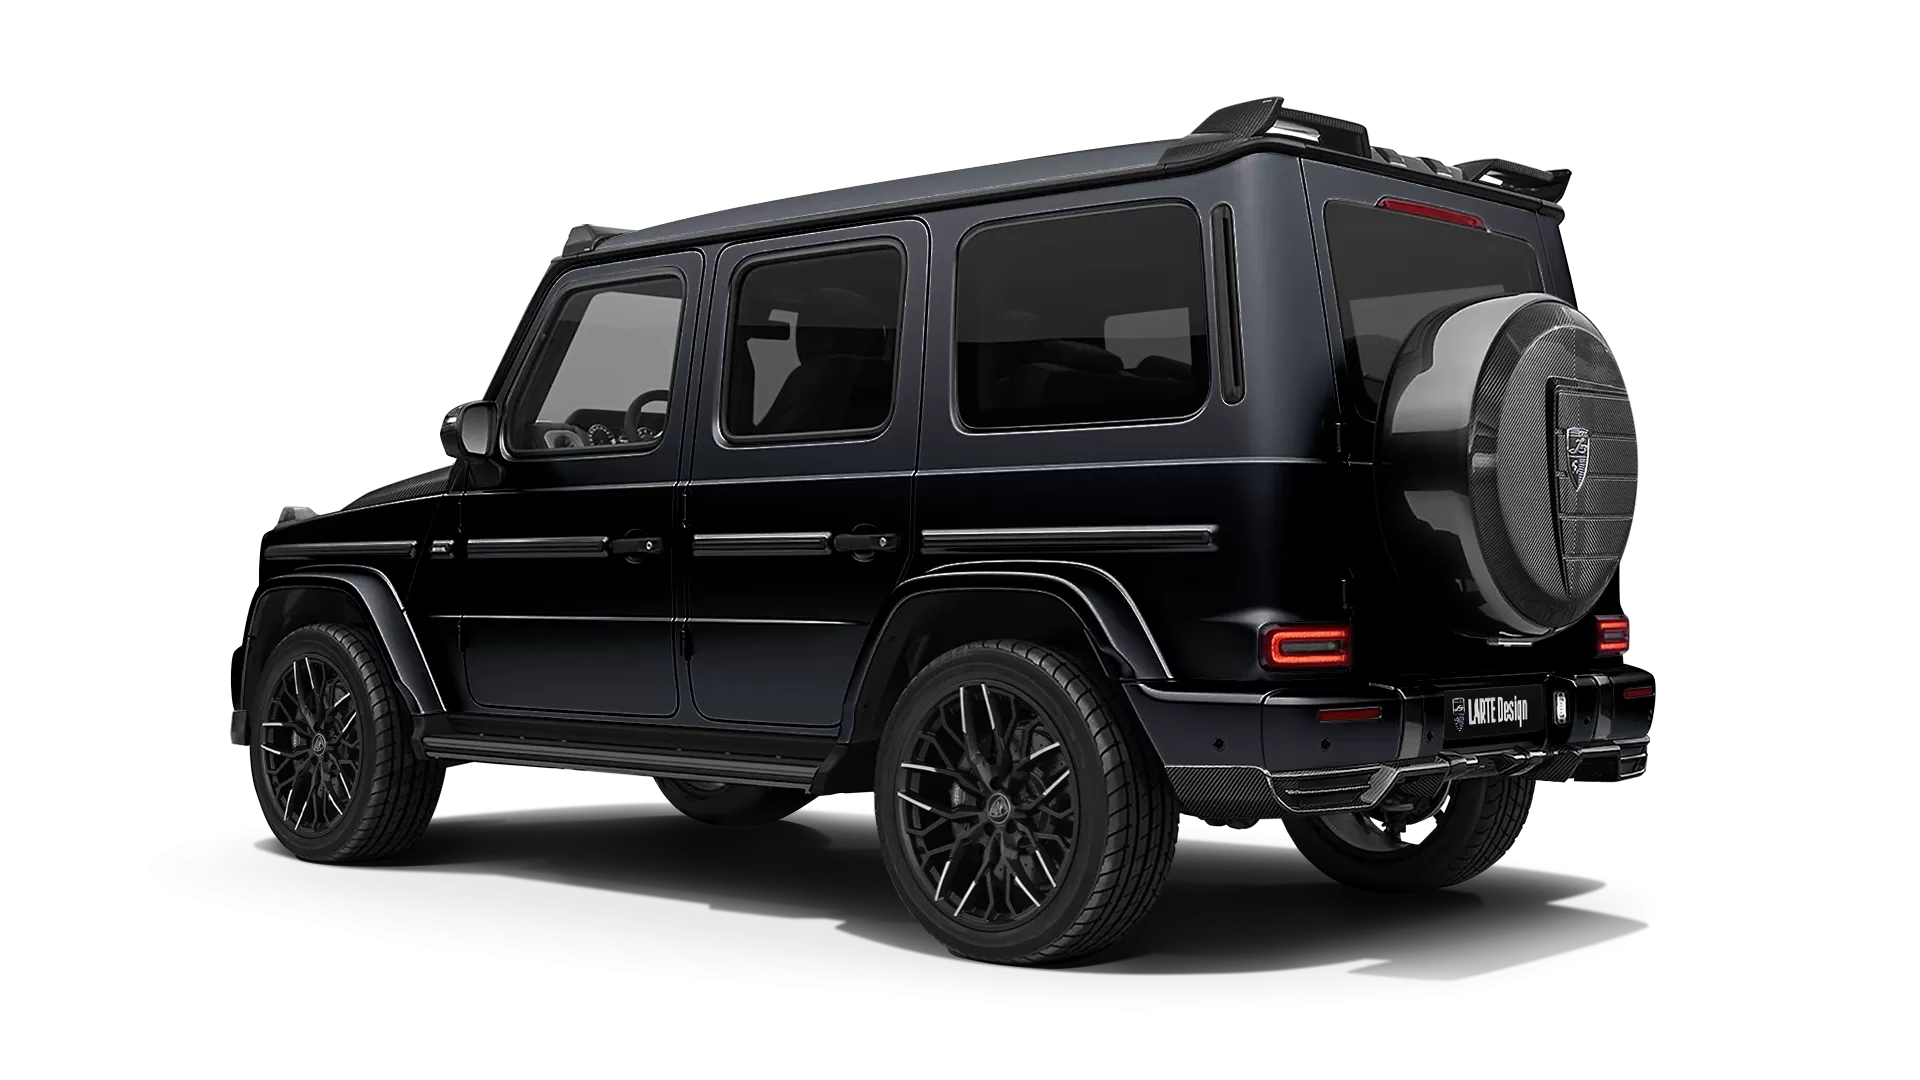 Mercedes G class W463 with carbon body kit: back view shown in Night Black